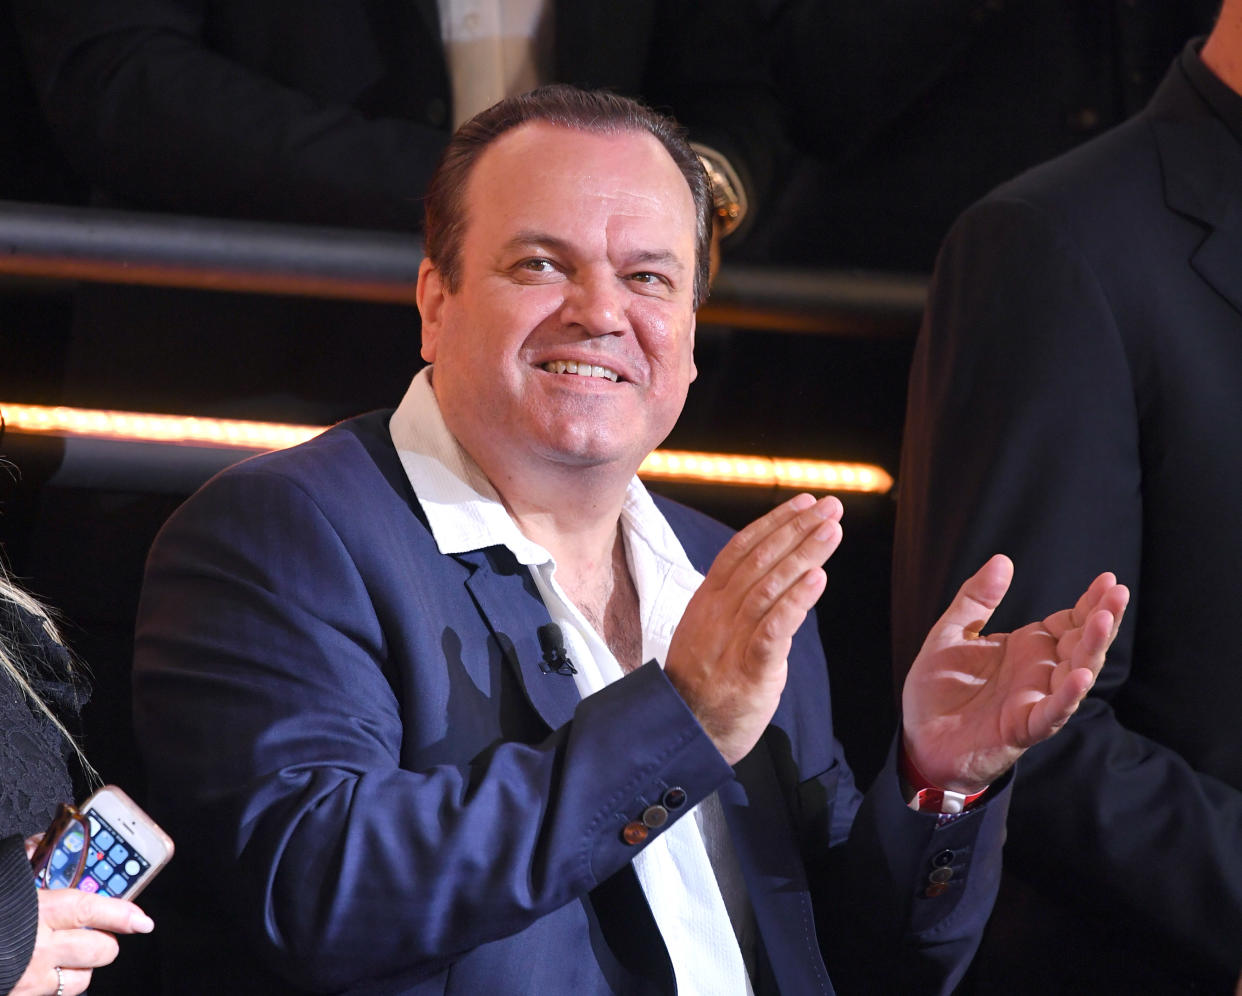 BOREHAMWOOD, ENGLAND - AUGUST 25:  Ex-housemate Shaun Williamson attends the Celebrity Big Brother Final at Elstree Studios on August 25, 2017 in Borehamwood, England.  (Photo by Karwai Tang/WireImage)